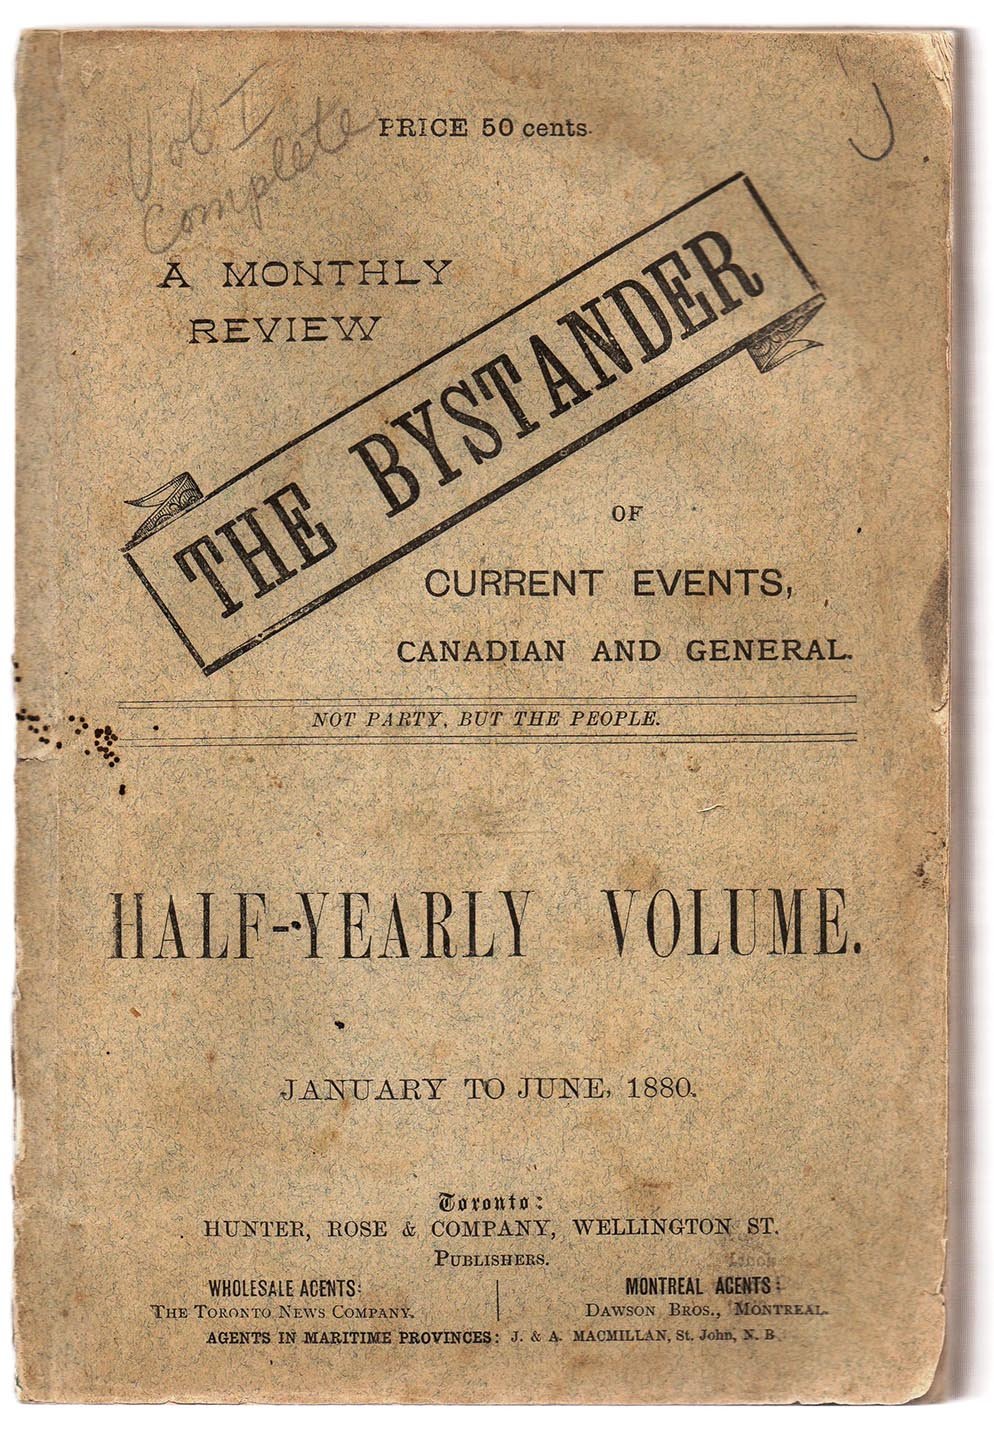 The Bystander: A Monthly Review of Current Events, Canadian and General. Jan. - June 1880